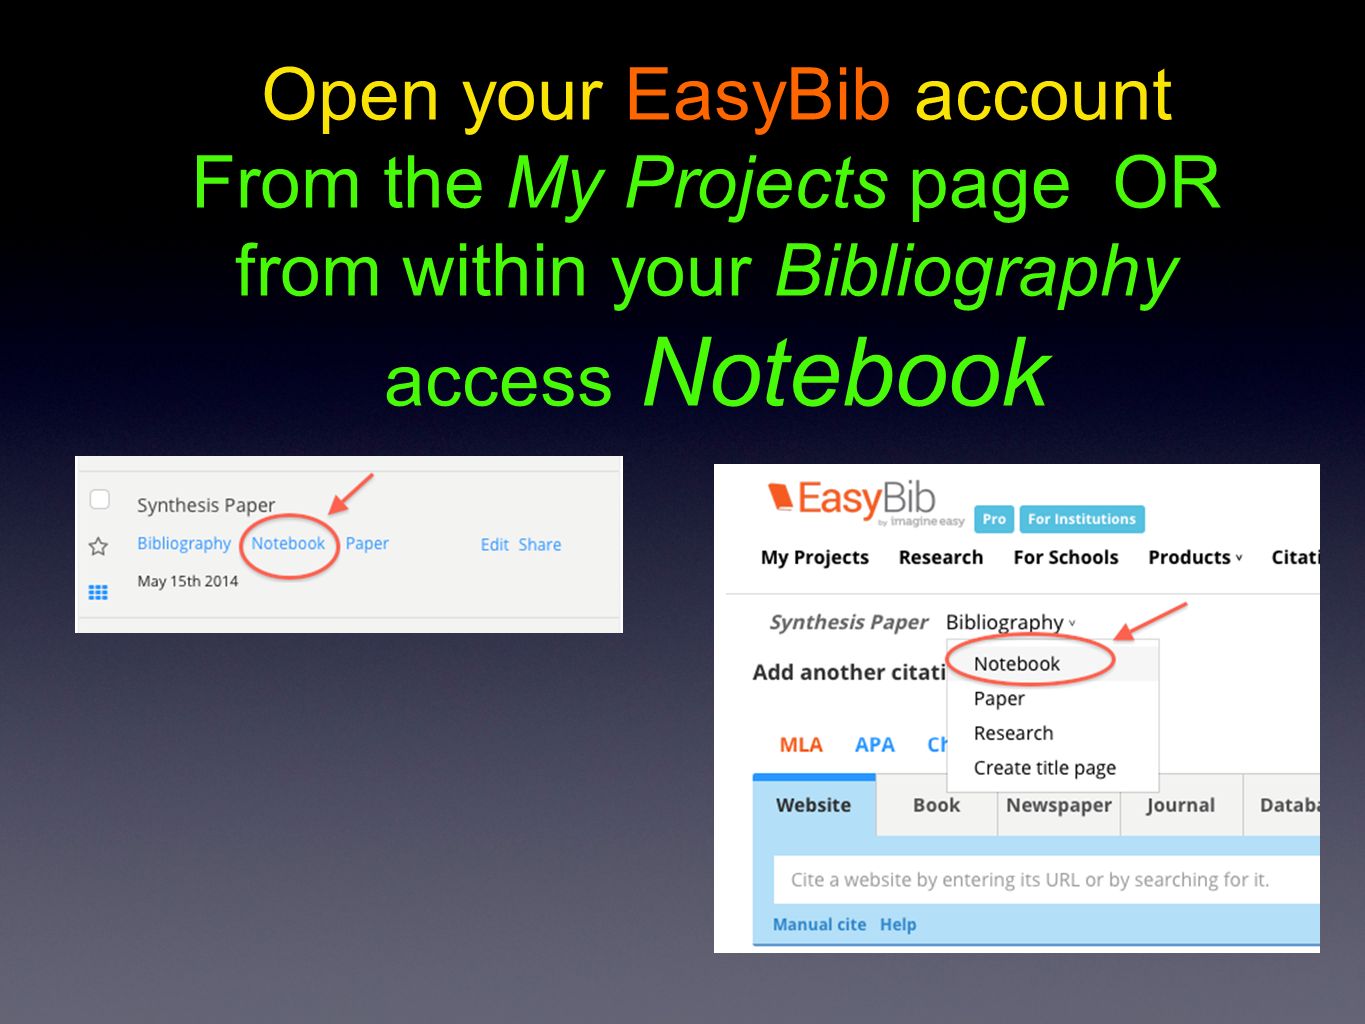 Open your EasyBib account From the My Projects page OR from within your Bibliography access Notebook